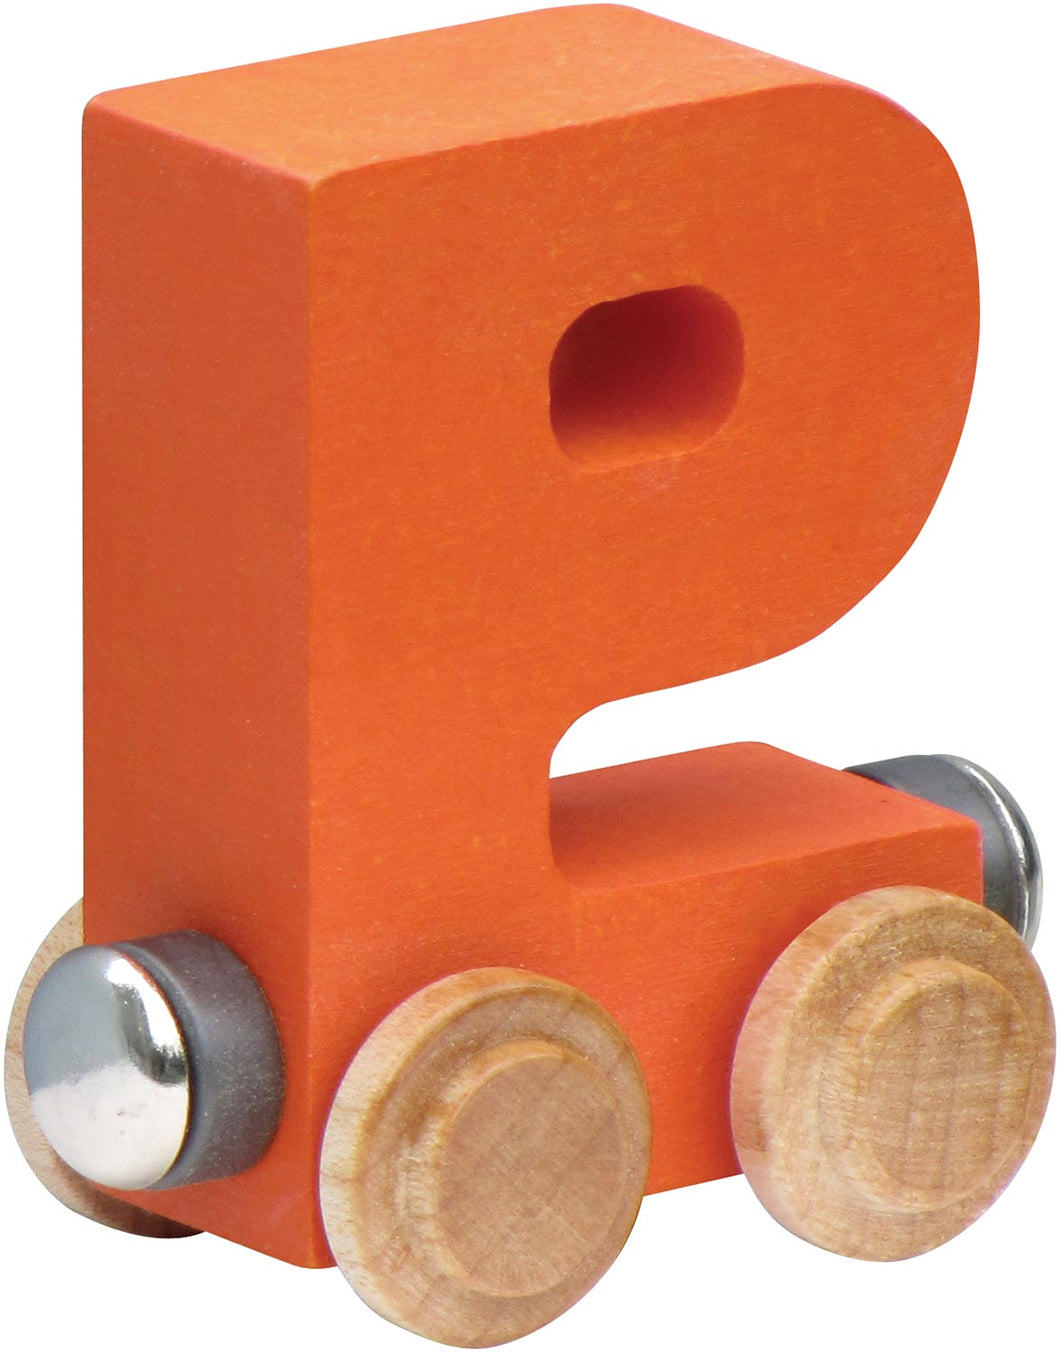 Letter P- Bright Colored Wooden Name Train